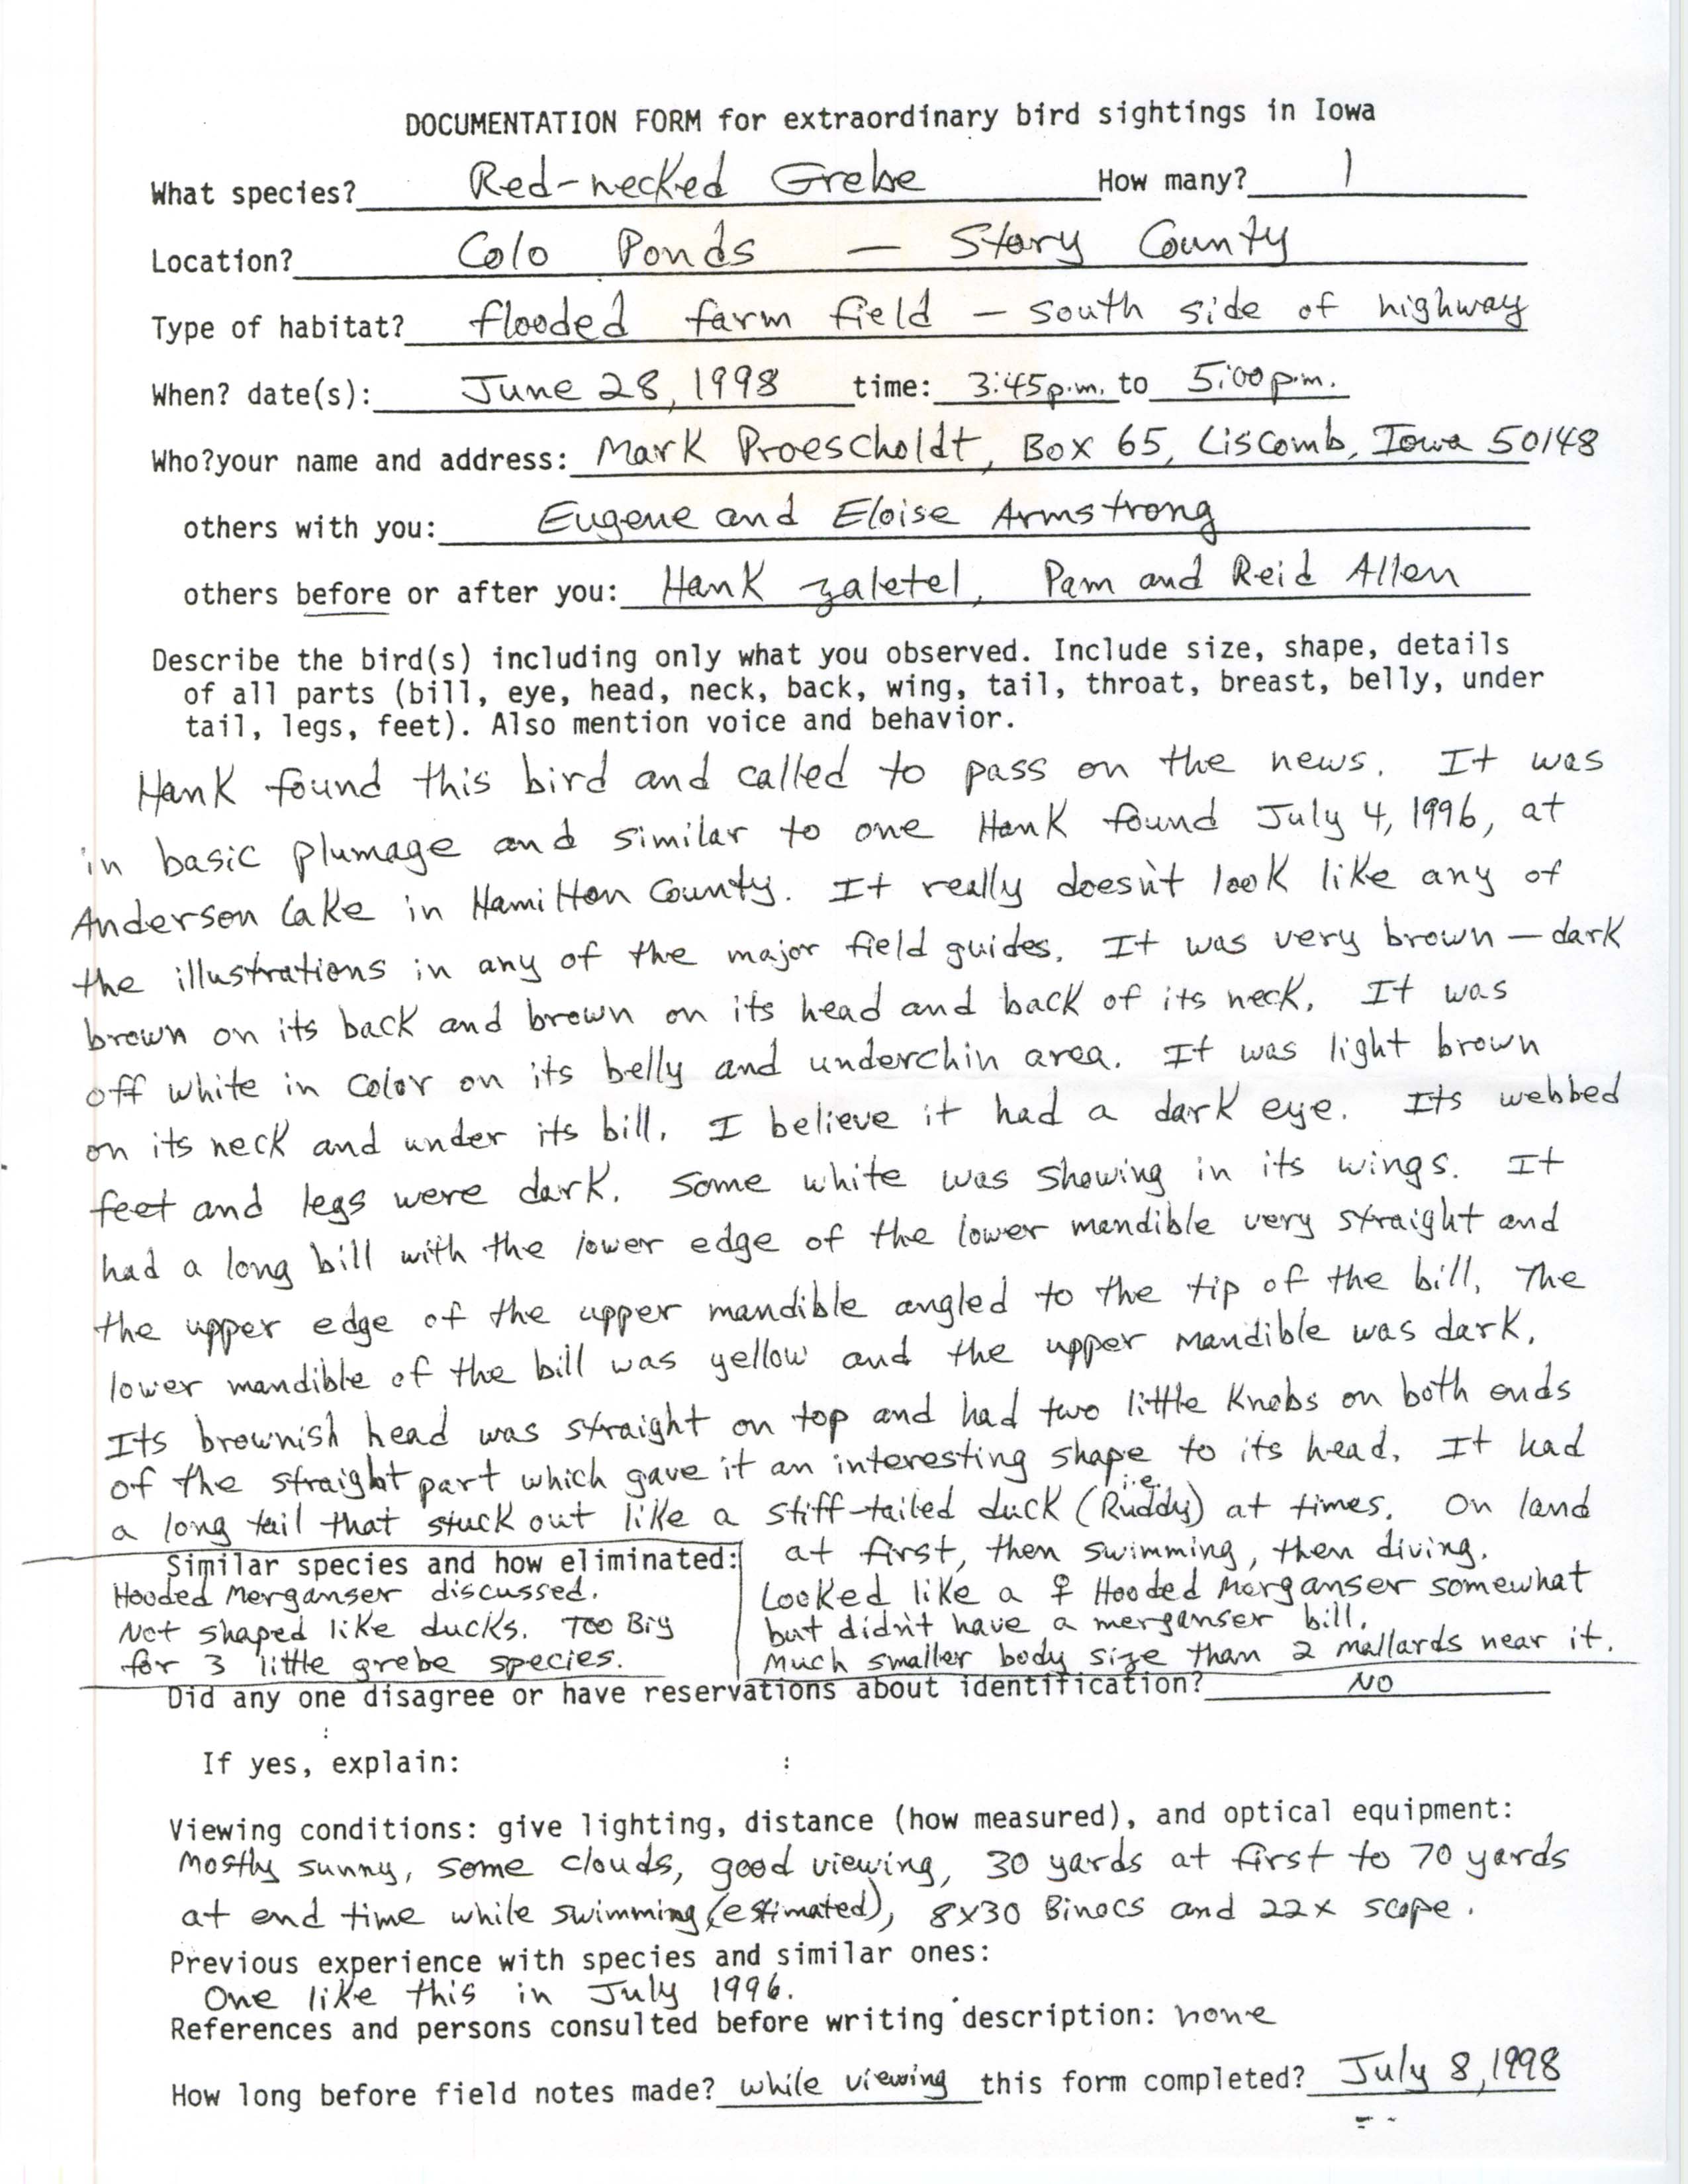 Rare bird documentation form for Red-necked Grebe at Colo Ponds, 1998